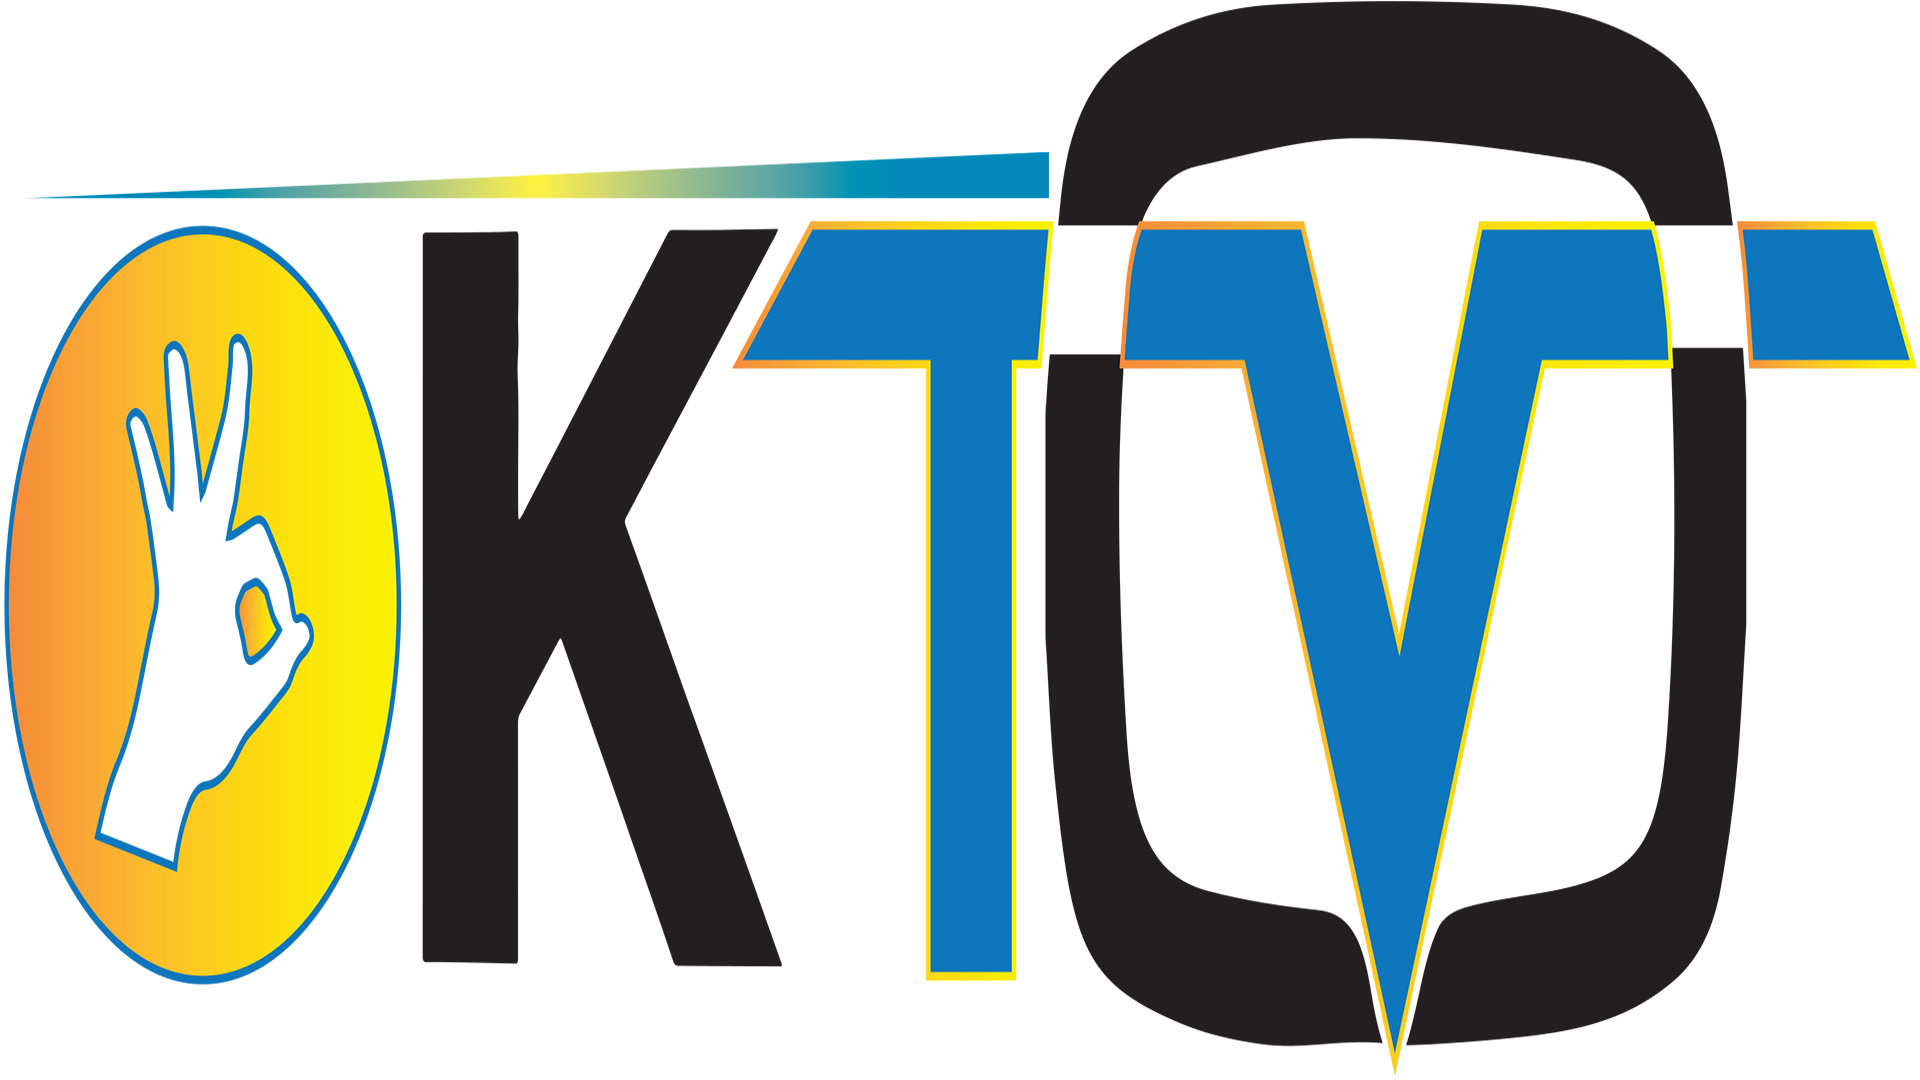 First Episode of the Flagship Talk Show "Going Beyond Story" by Valiant Eagle Inc.'s (OTC:PSRUD) OKTV Airs in March